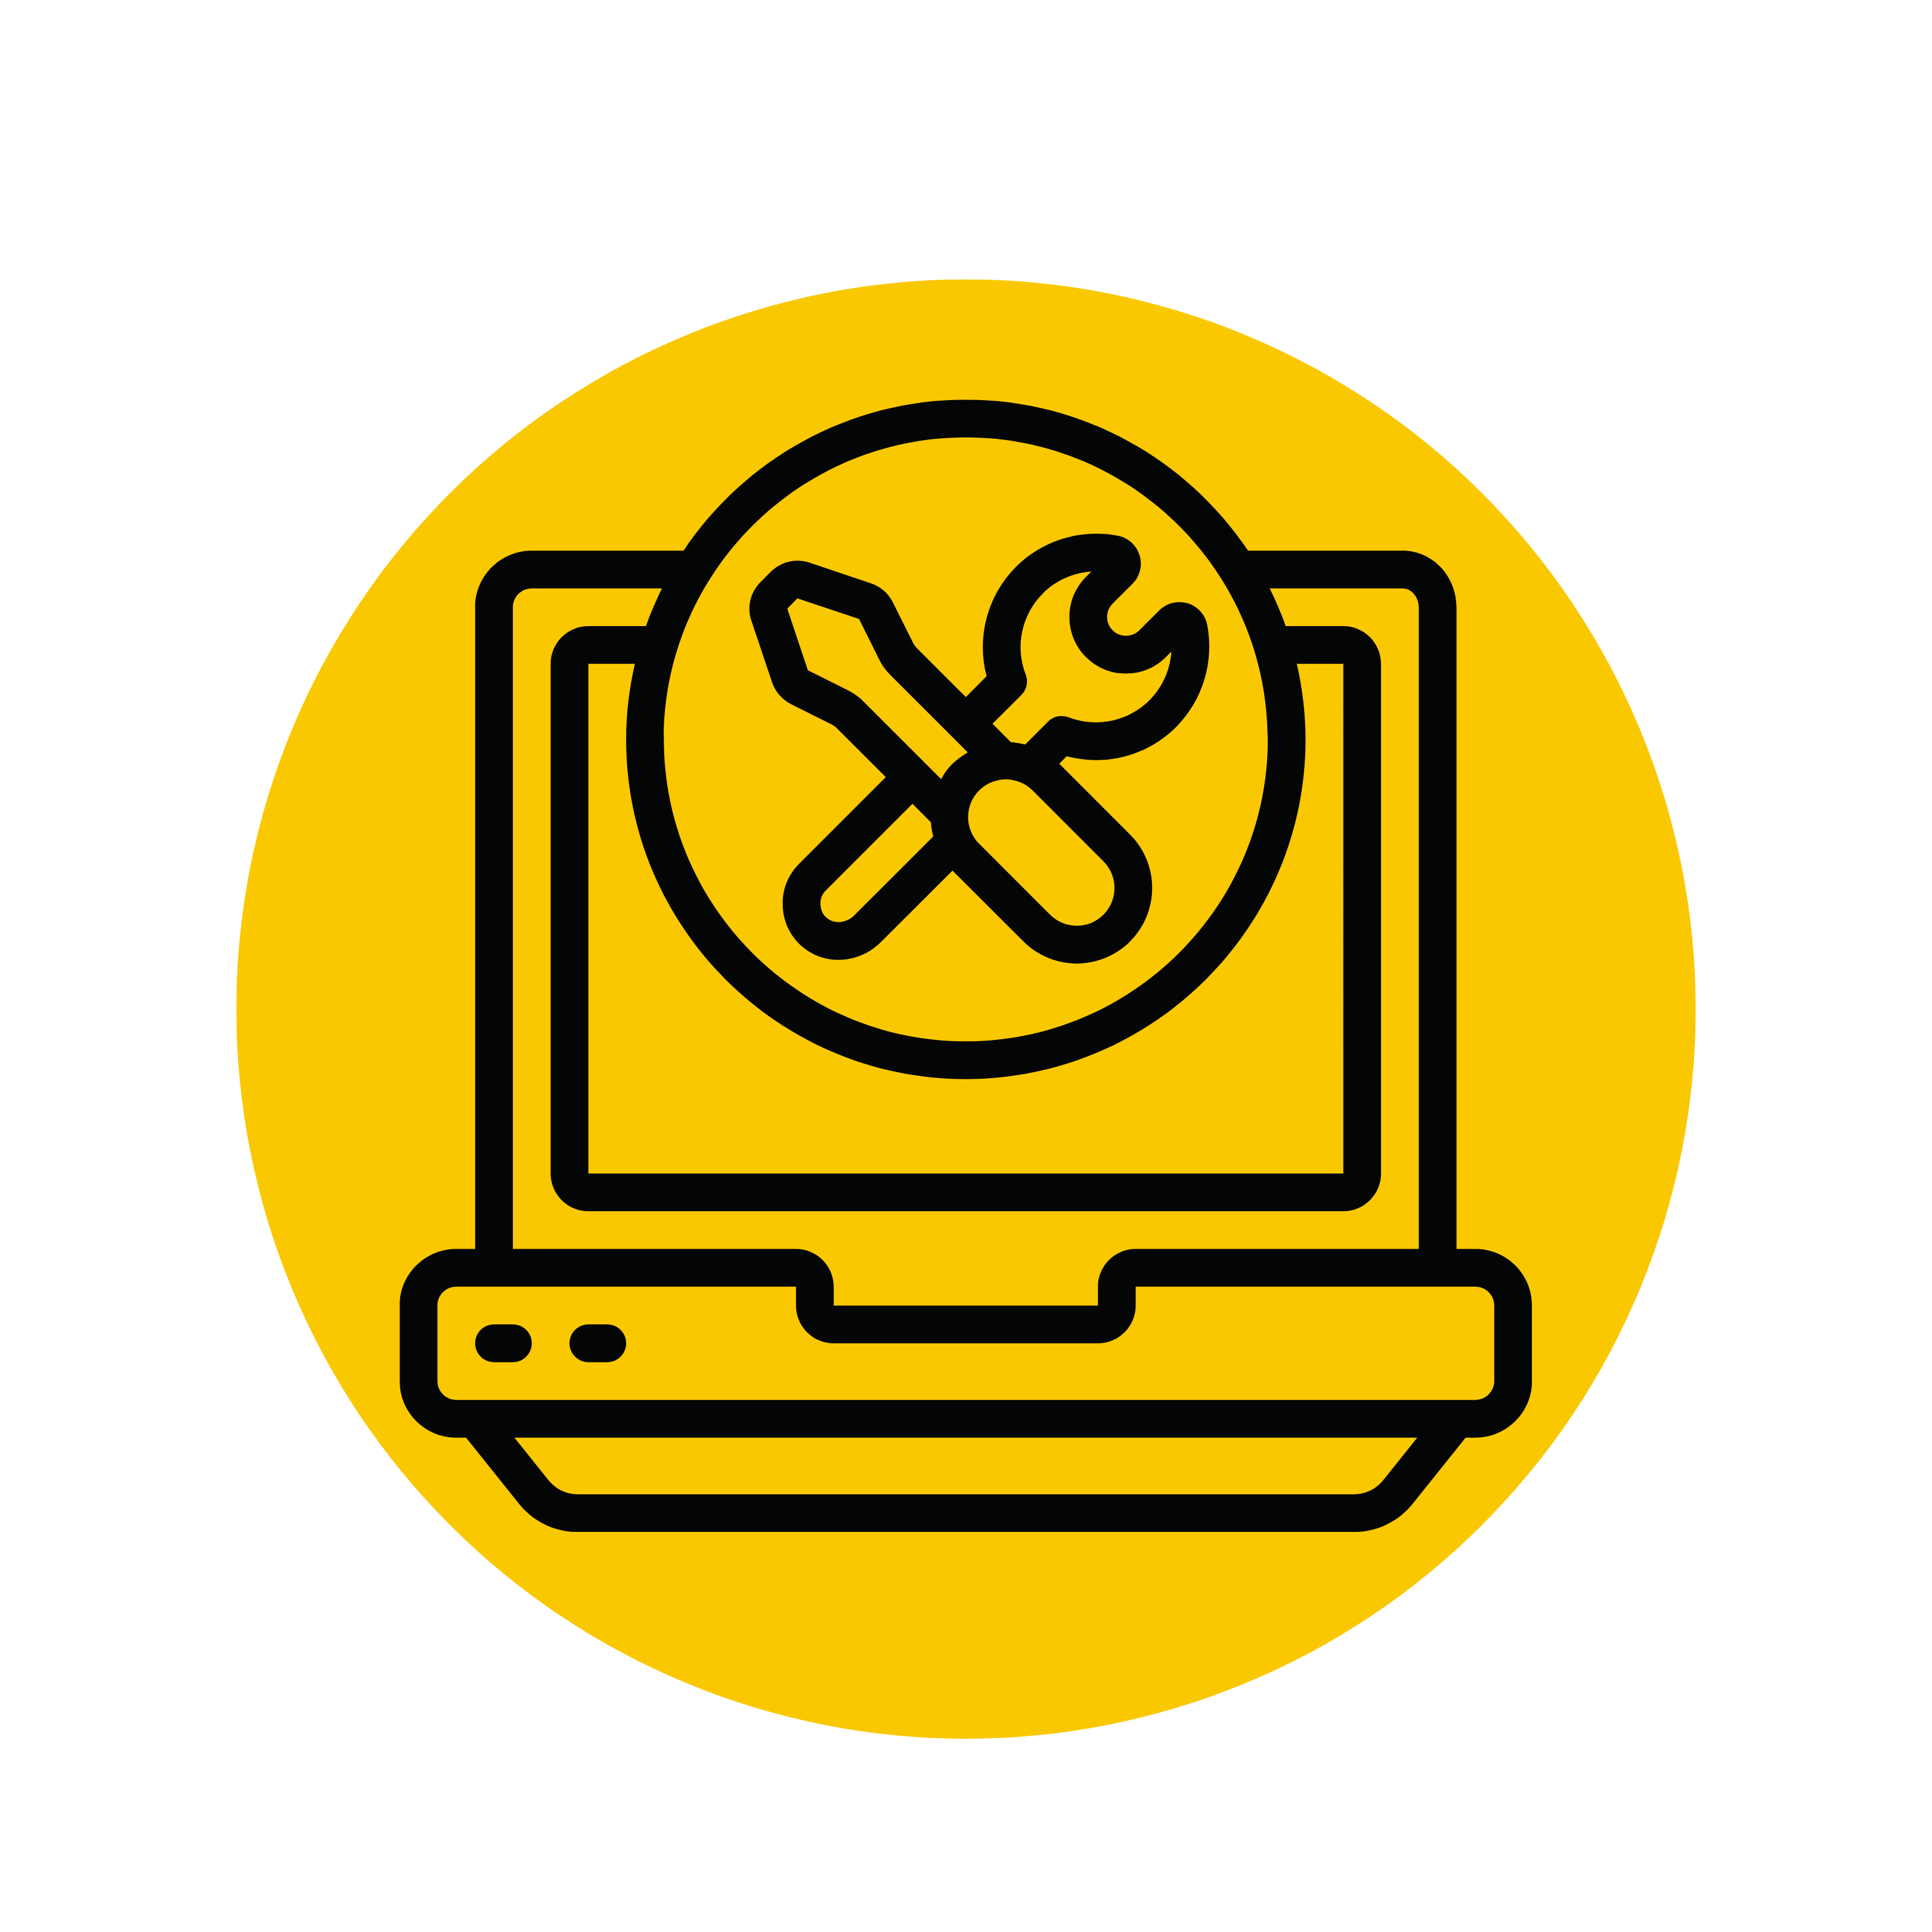 yellow background and black icon of a computer screen with a screwdriver and wrench layered over it